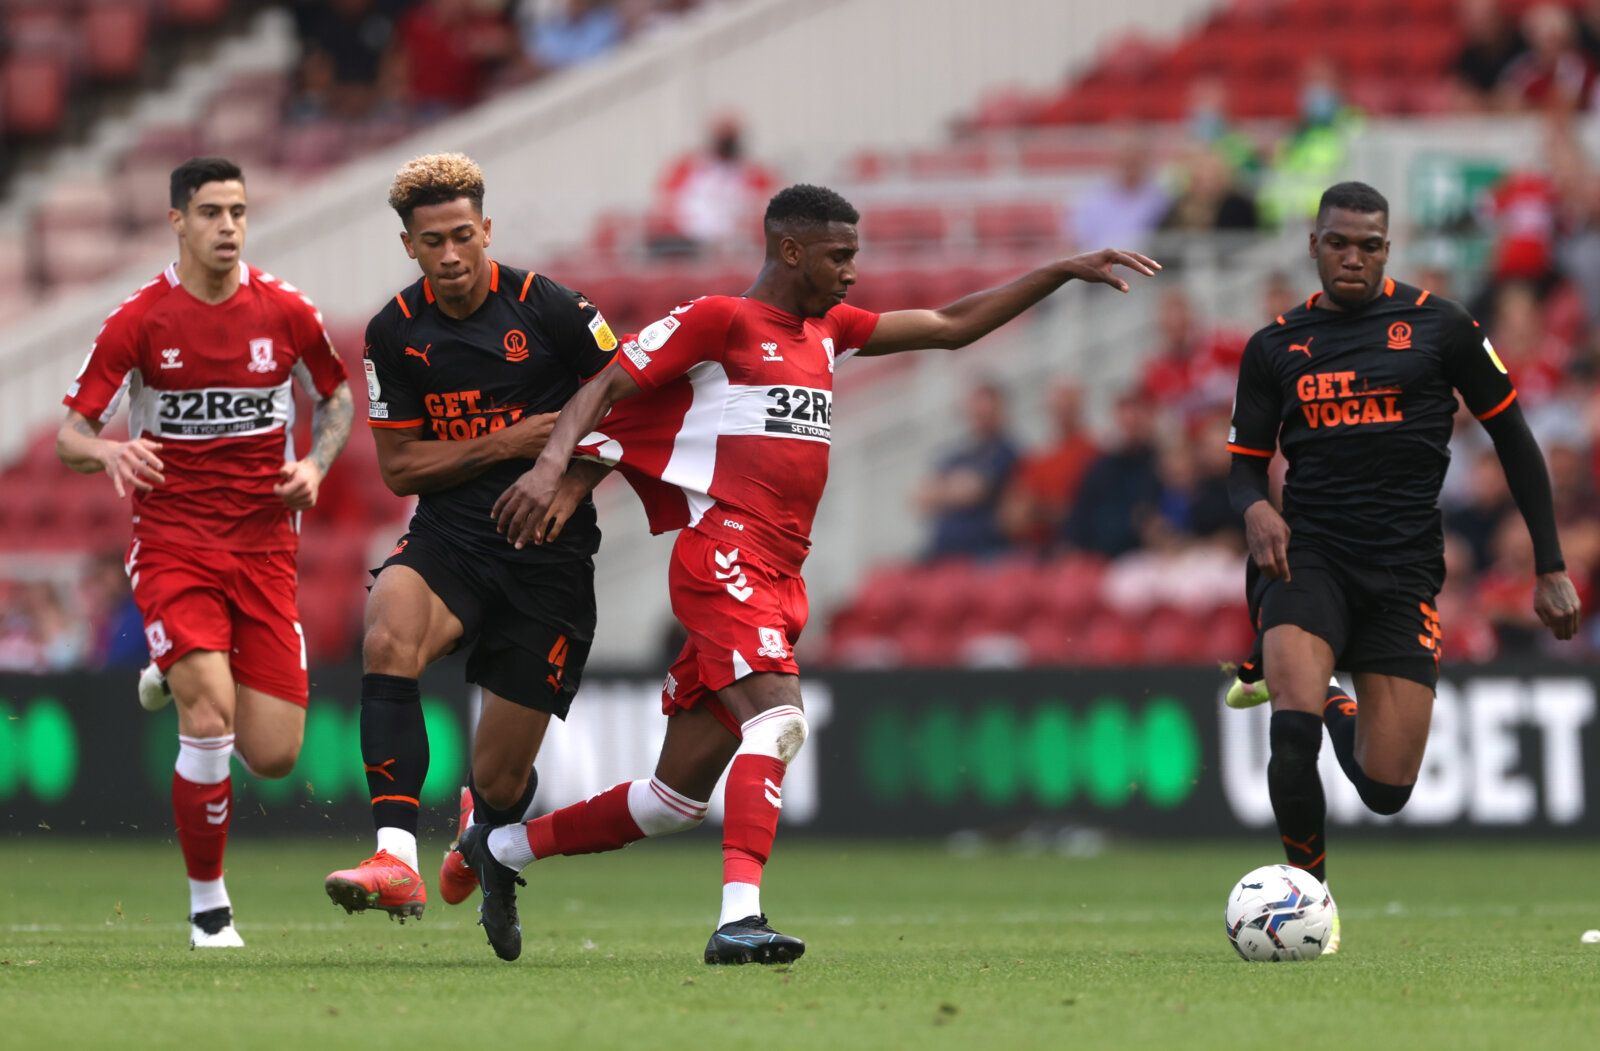 Soccer Football - Championship - Middlesbrough v Blackpool - Riverside Stadium, Middlesbrough, Britain - September 18, 2021 Middlesbrough's Isaiah Jones in action with Blackpool's Jordan Lawrence-Gabriel Action Images/Lee Smith EDITORIAL USE ONLY. No use with unauthorized audio, video, data, fixture lists, club/league logos or 'live' services. Online in-match use limited to 75 images, no video emulation. No use in betting, games or single club /league/player publications.  Please contact your ac